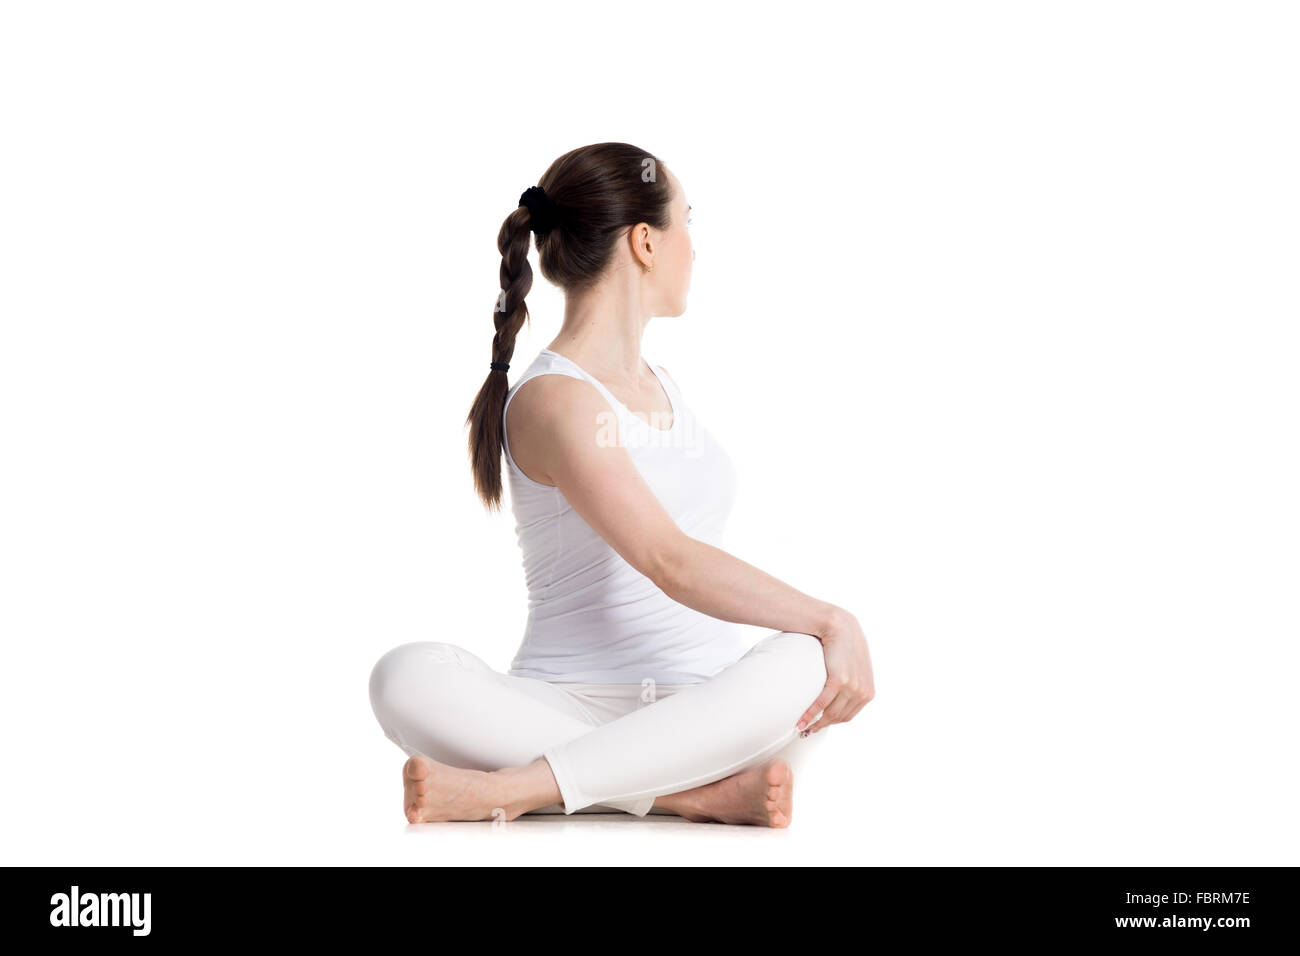 Single Caucasian Woman In Lying Yoga Pose, Legs Crossed,side View, Dressed  In Black On White Background Stock Photo, Picture and Royalty Free Image.  Image 16038627.